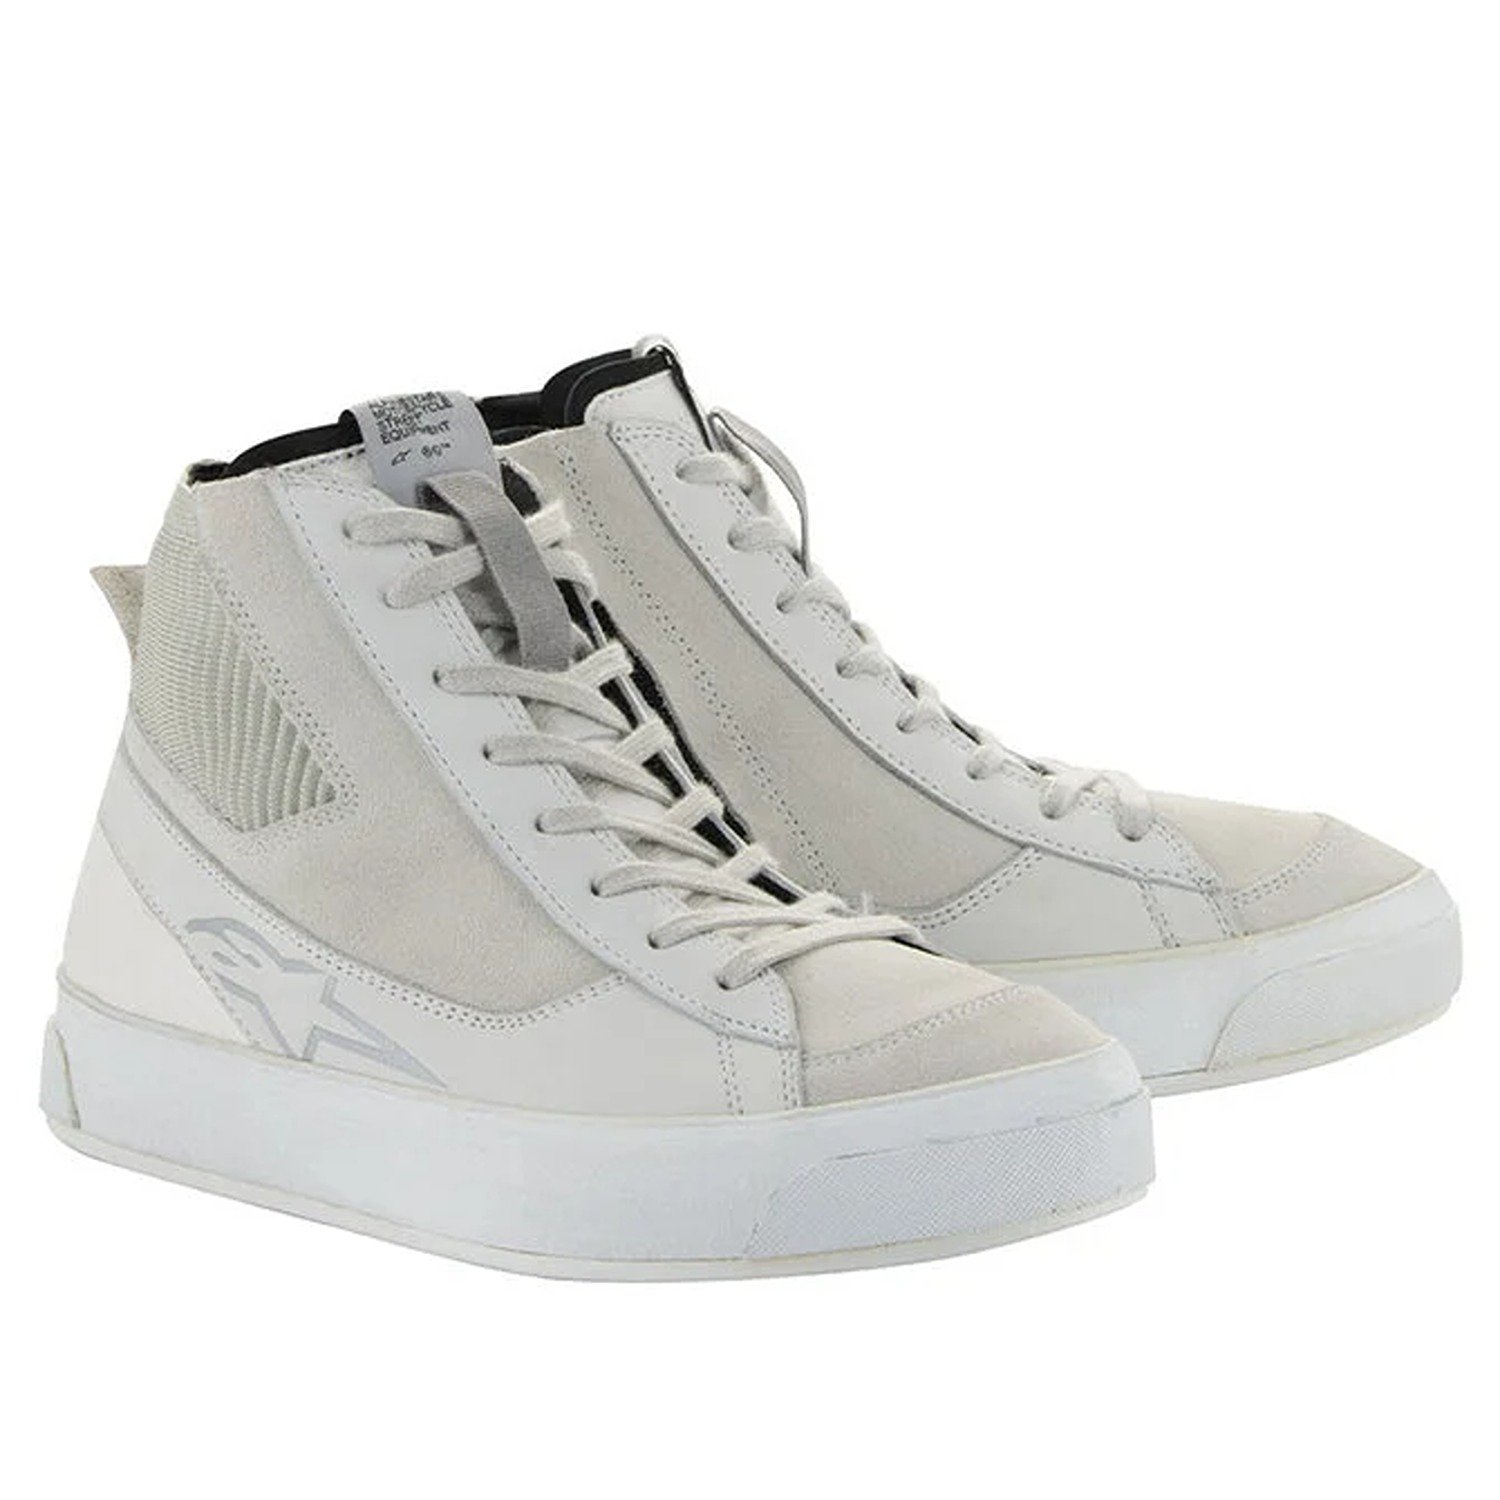 Image of EU Alpinestars Stated Shoes White Cool Gray Taille US 105